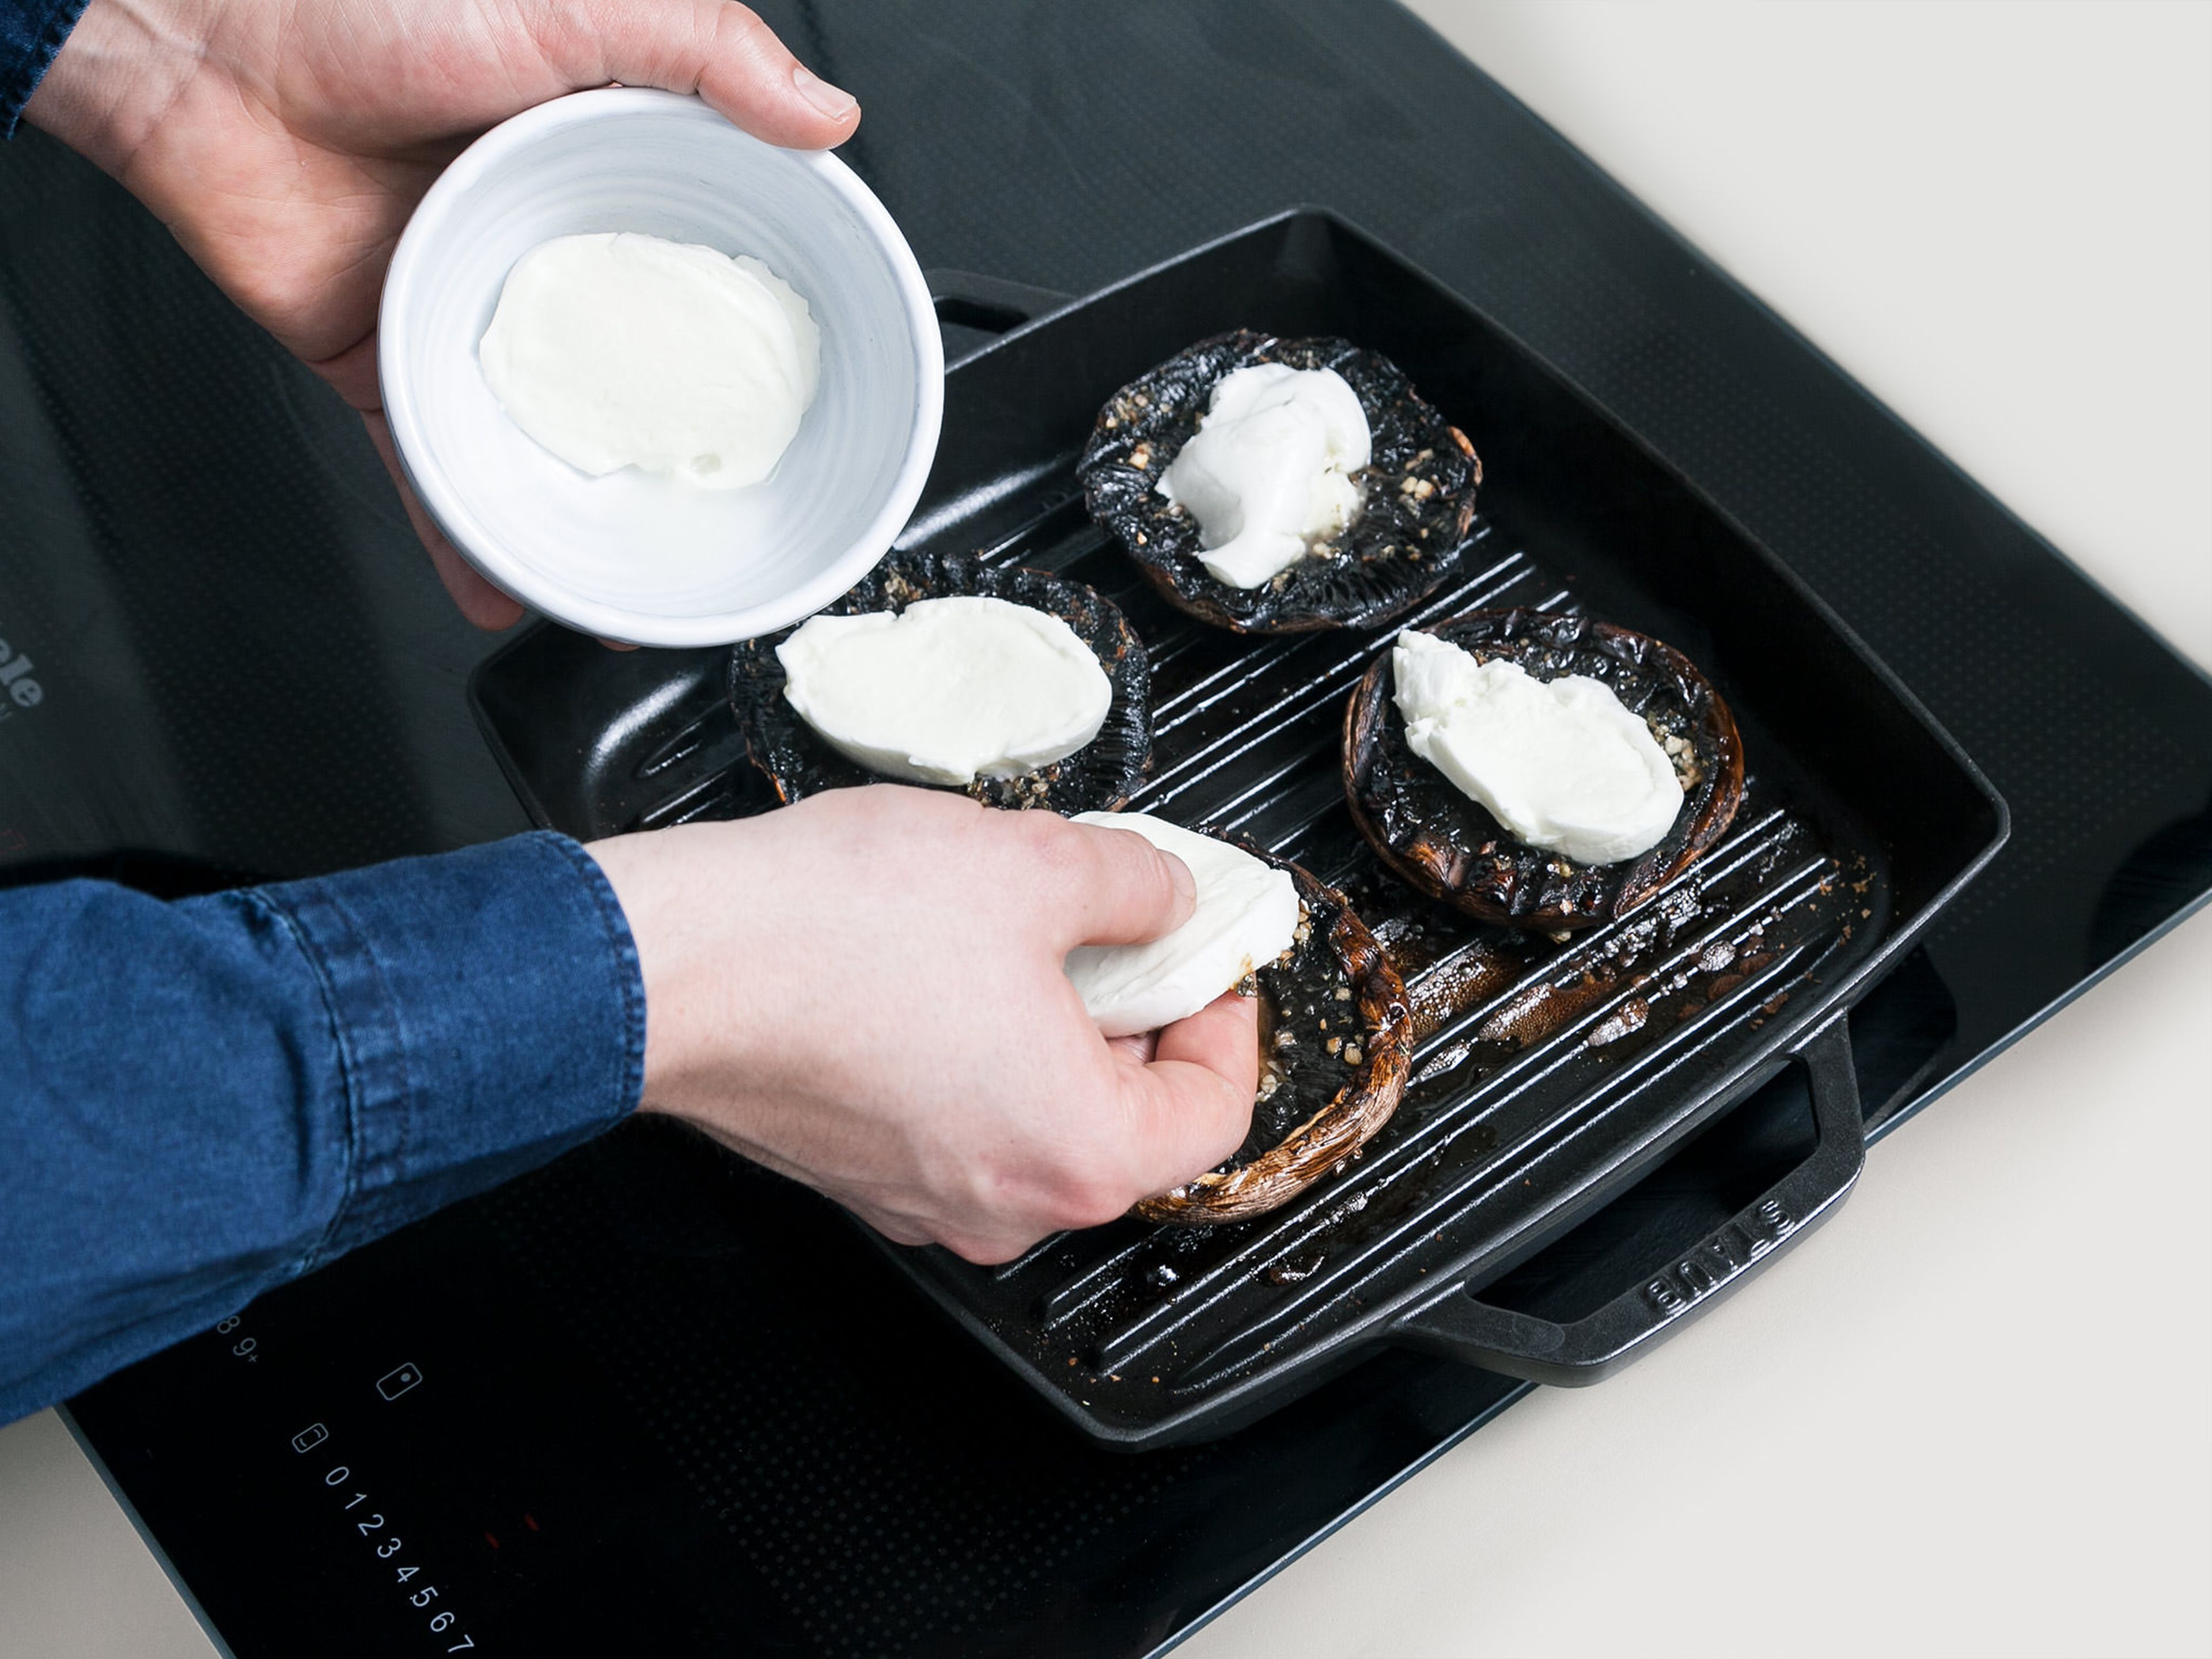 Heat grill pan over medium-high heat and toast burger buns. Remove from pan and set aside. Place mushrooms skin-side up in the pan and sear for approx. 2 min. Flip, and place mozzarella slices on top. Fry for approx. 2 min. more.